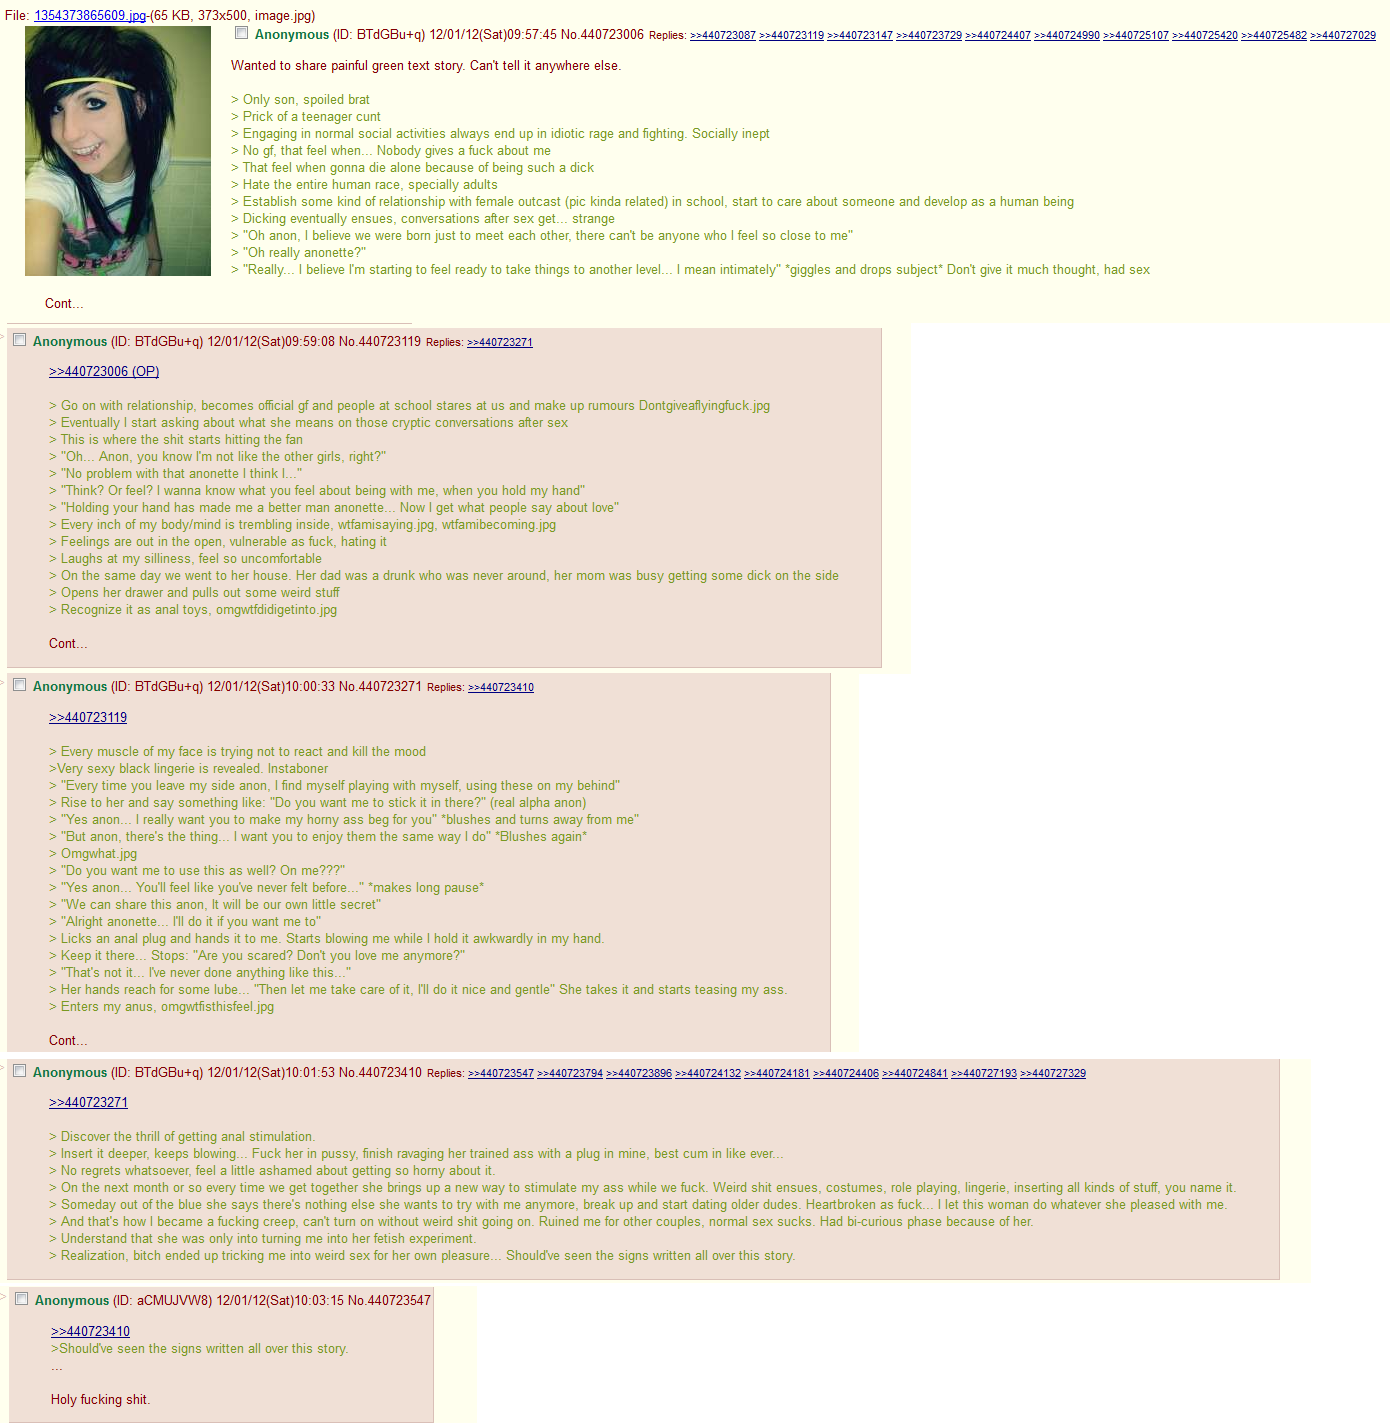 Yet another greentext story....